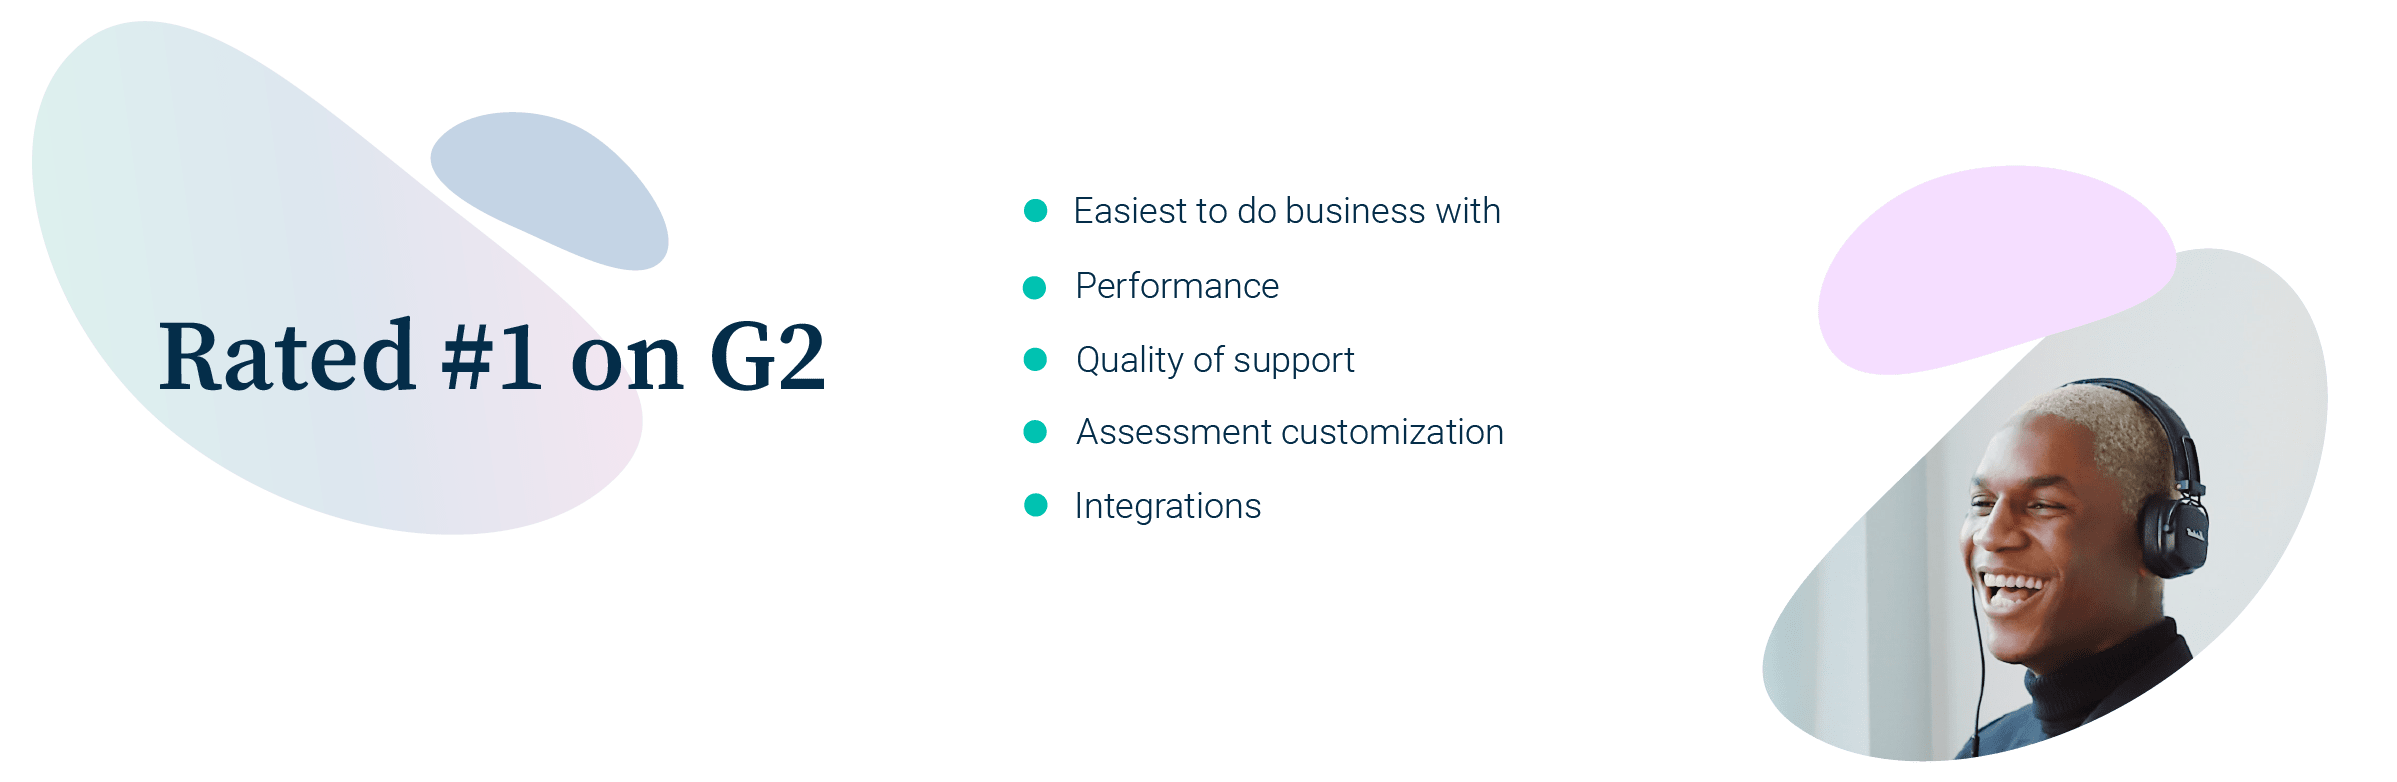 Rated #1 on G2 for:
Easiest to do business with
Performance
Quality of support
Assessment customization
Integrations